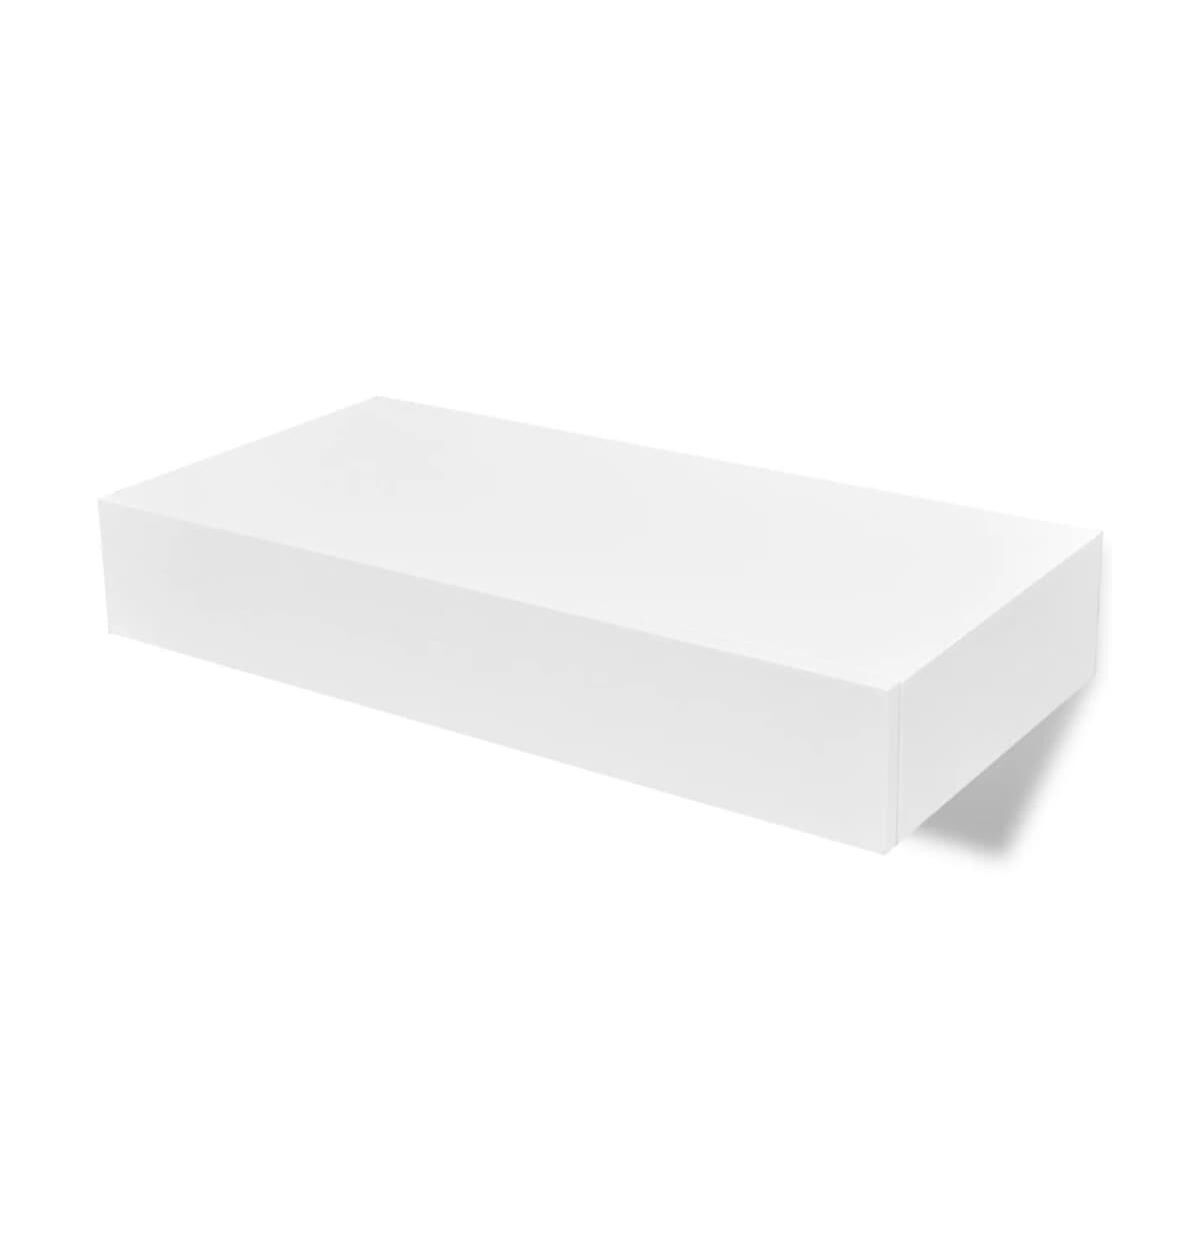 Vidaxl Floating Wall Shelves with Drawers 2 pcs White 18.9